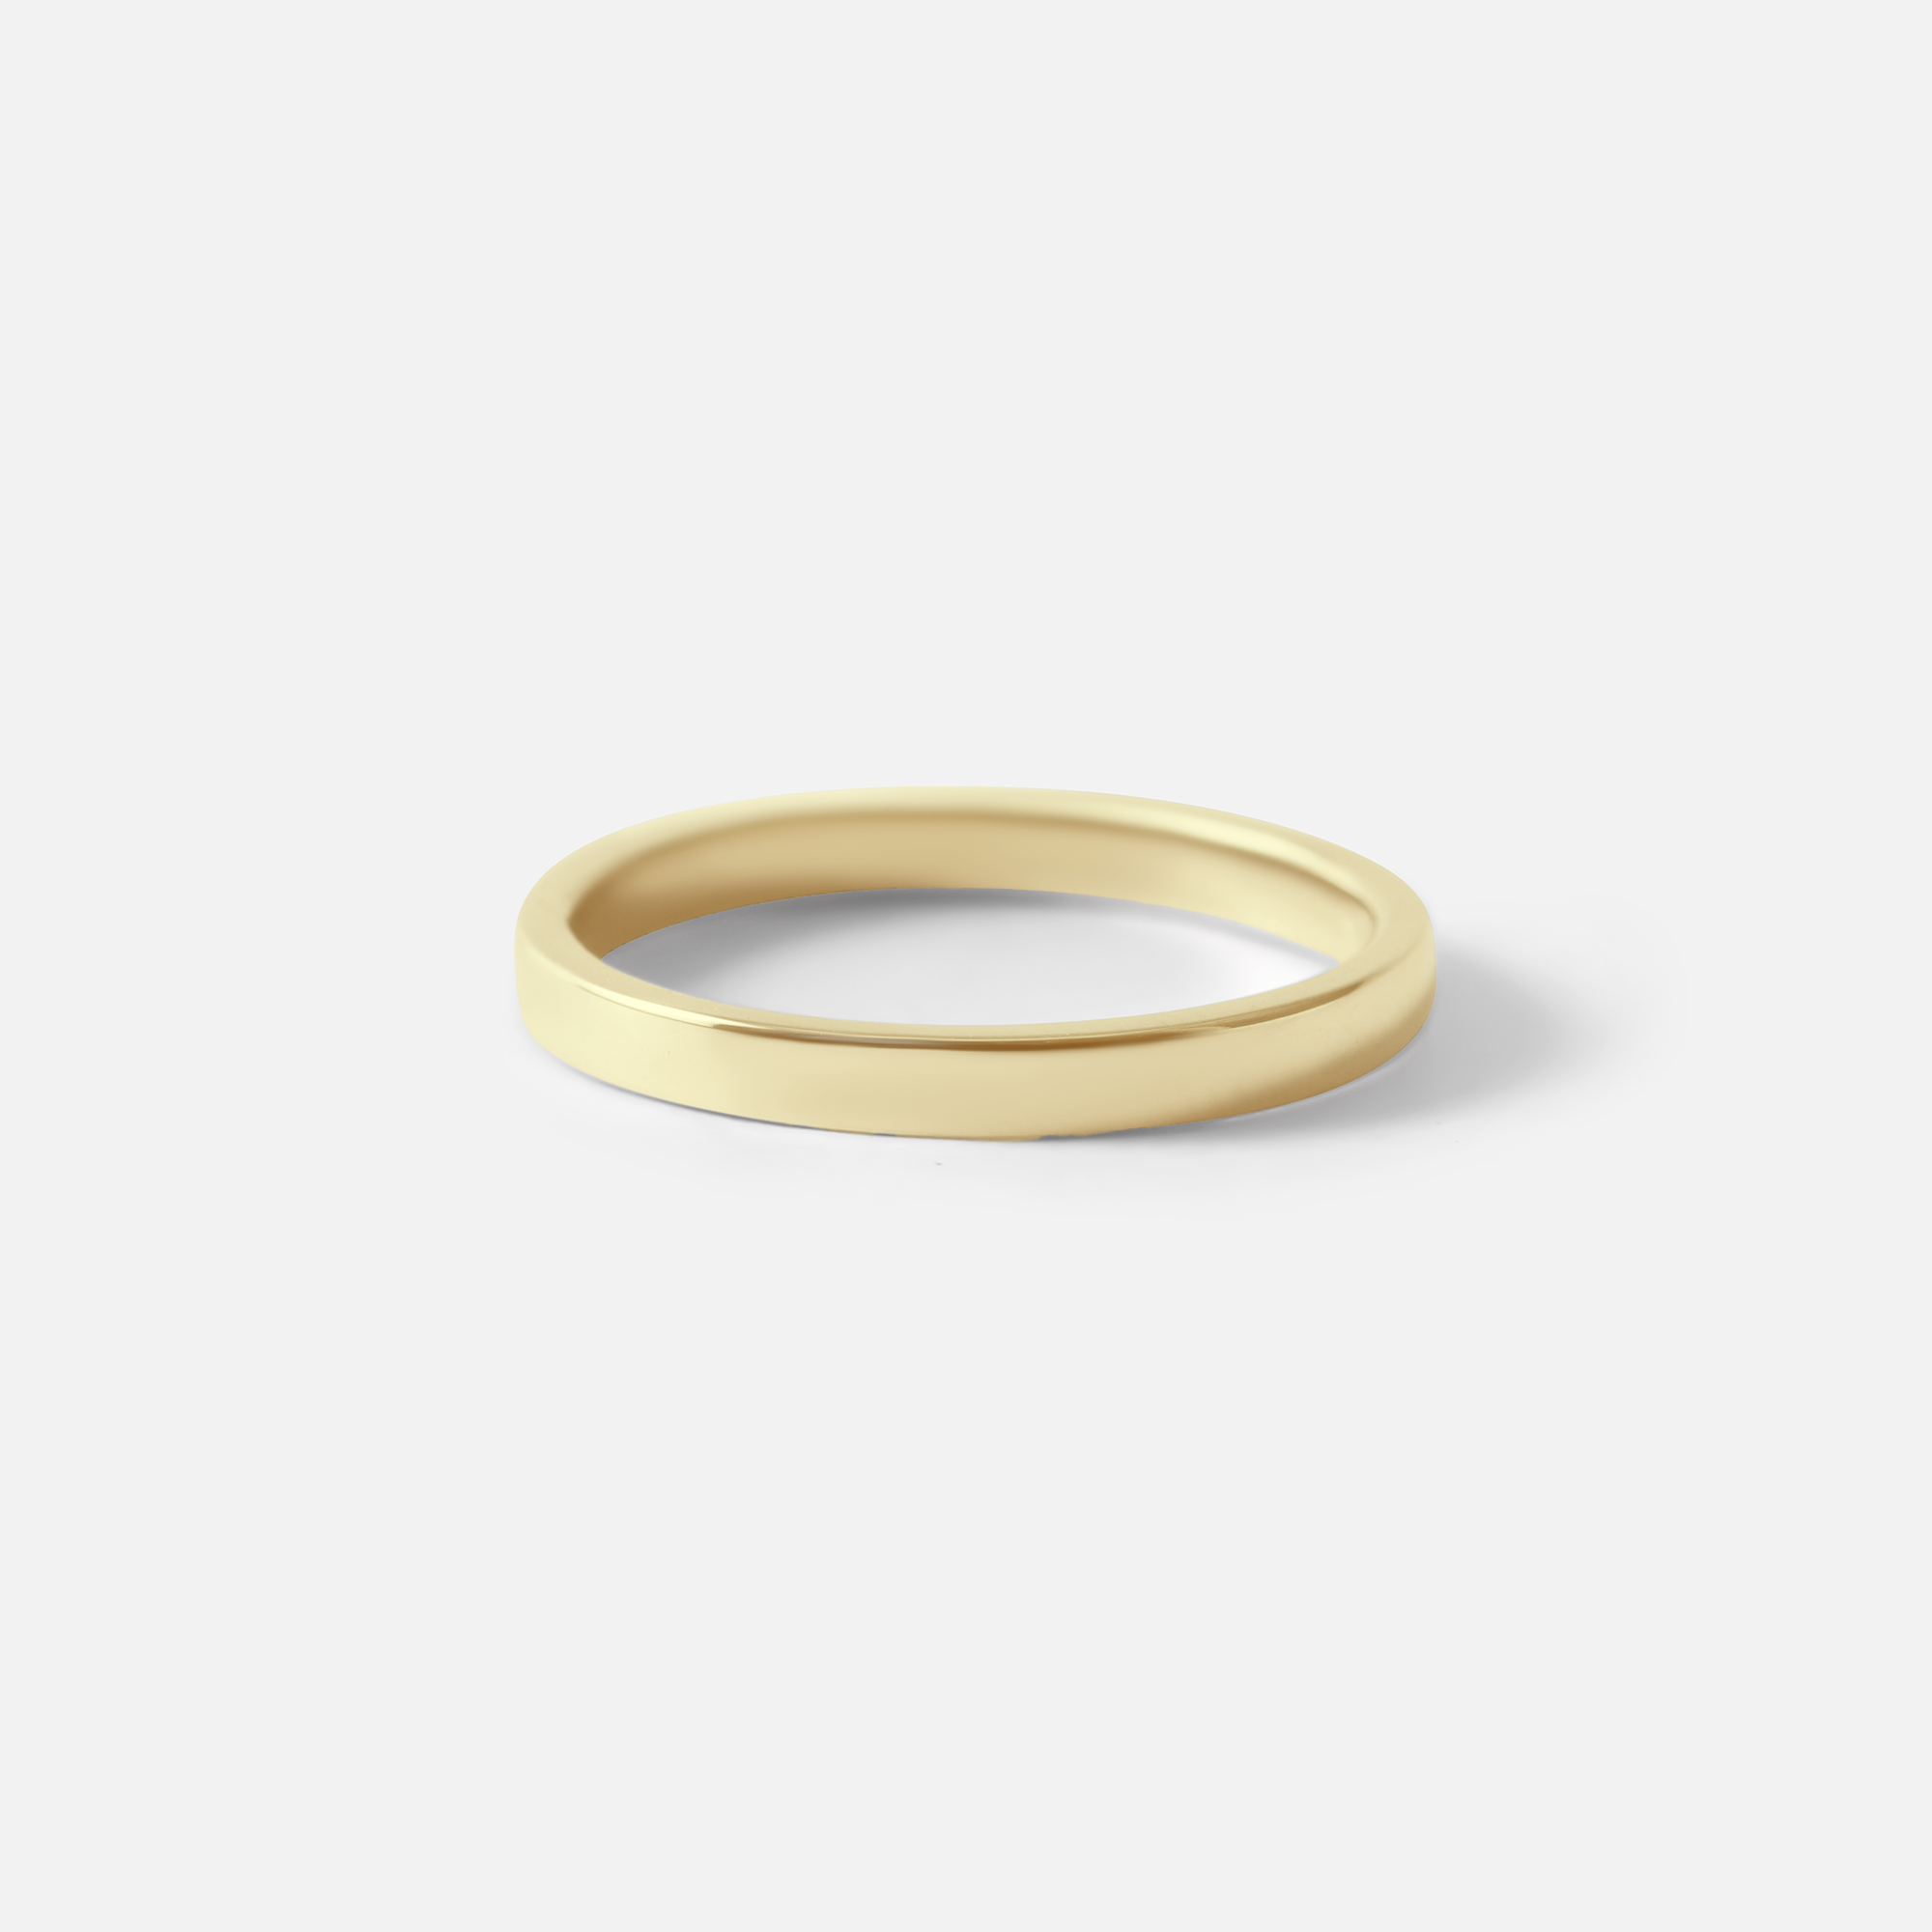 Angled view of Flat Band / 2mm Customizable By Hiroyo in 14k yellow gold